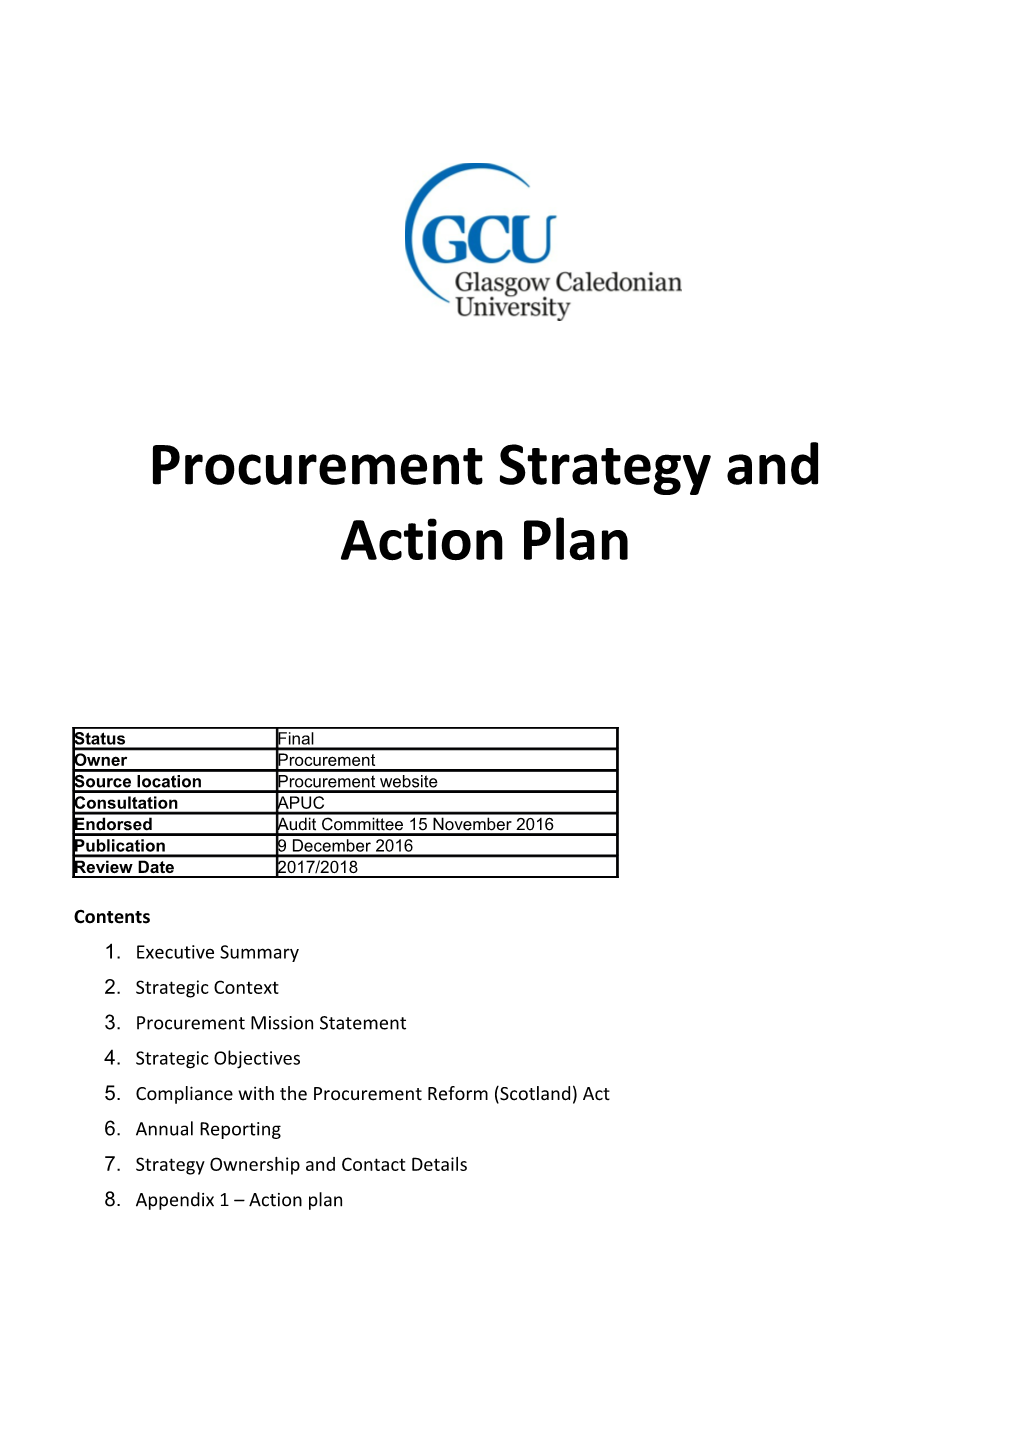 Procurement Strategy and Action Plan